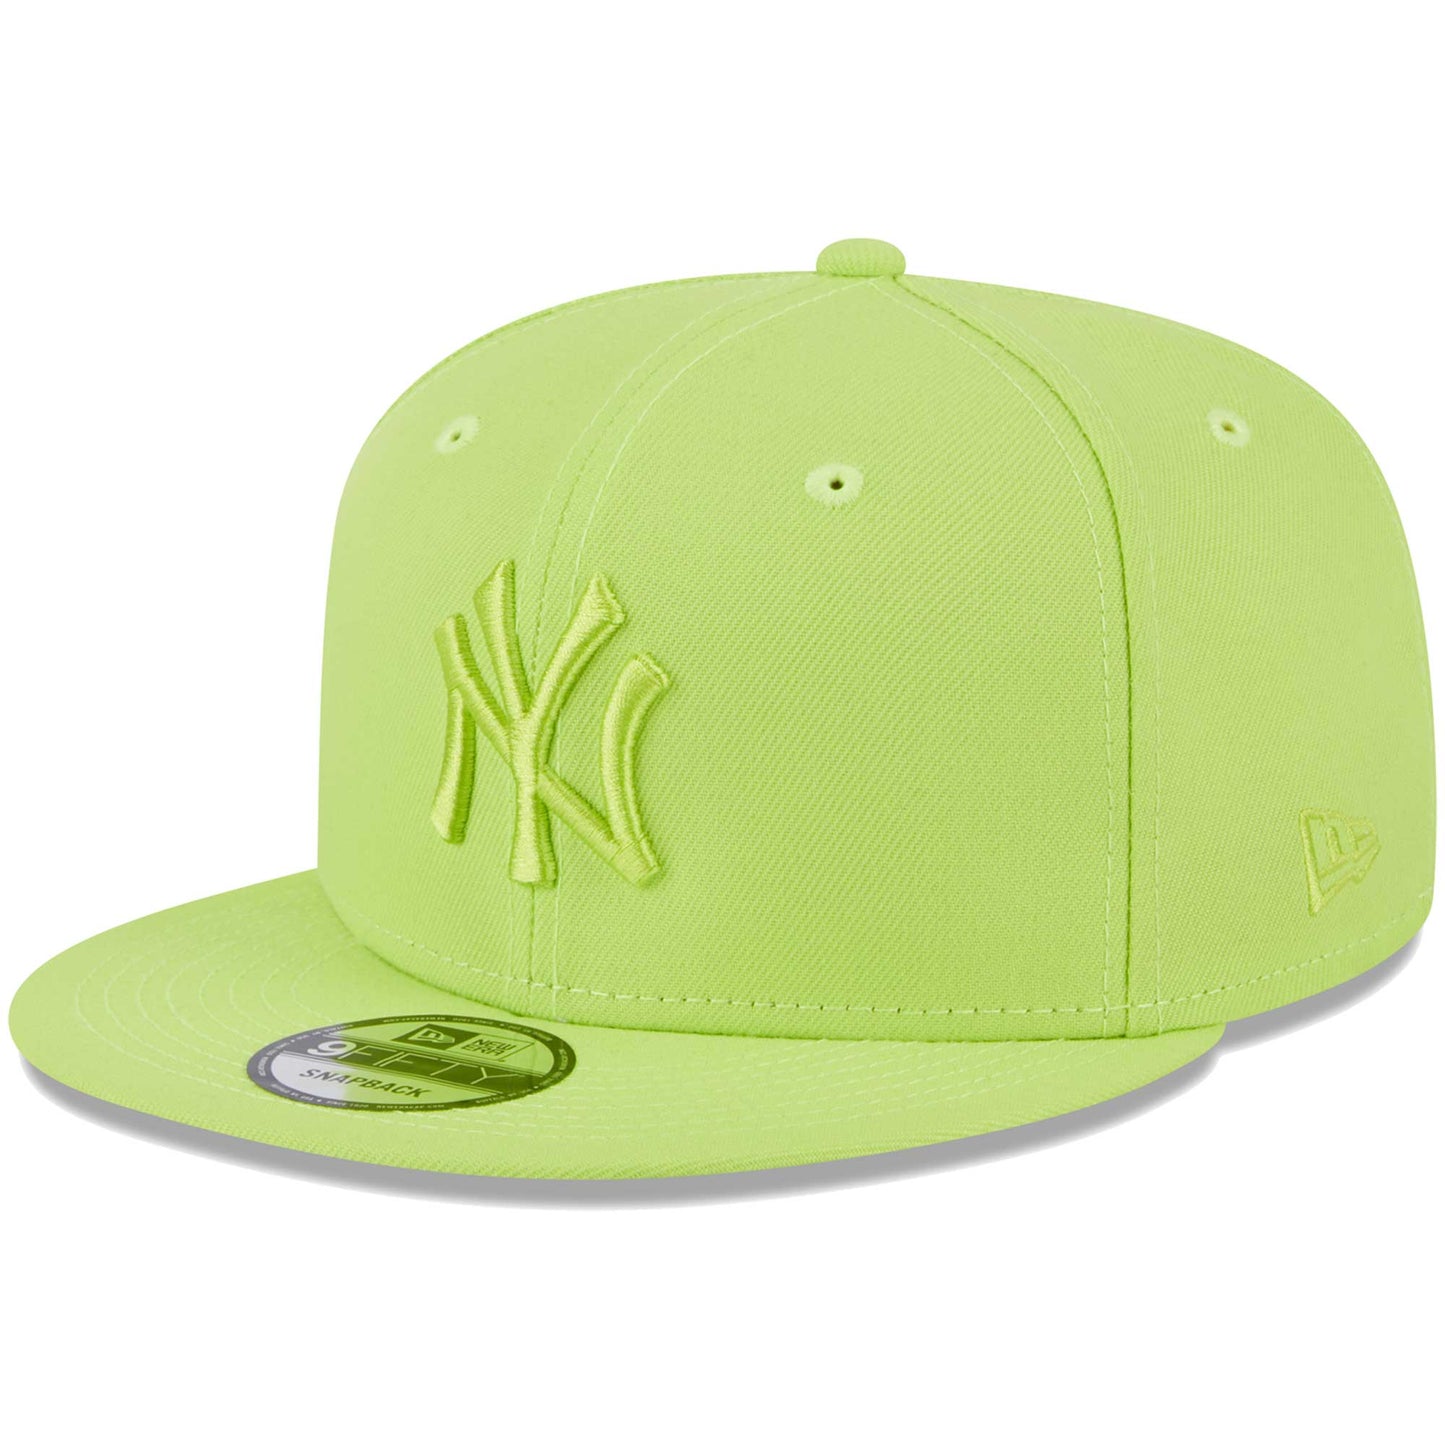 New York Yankees New Era Spring Color Basic 9FIFTY Snapback Hat - Neon Green